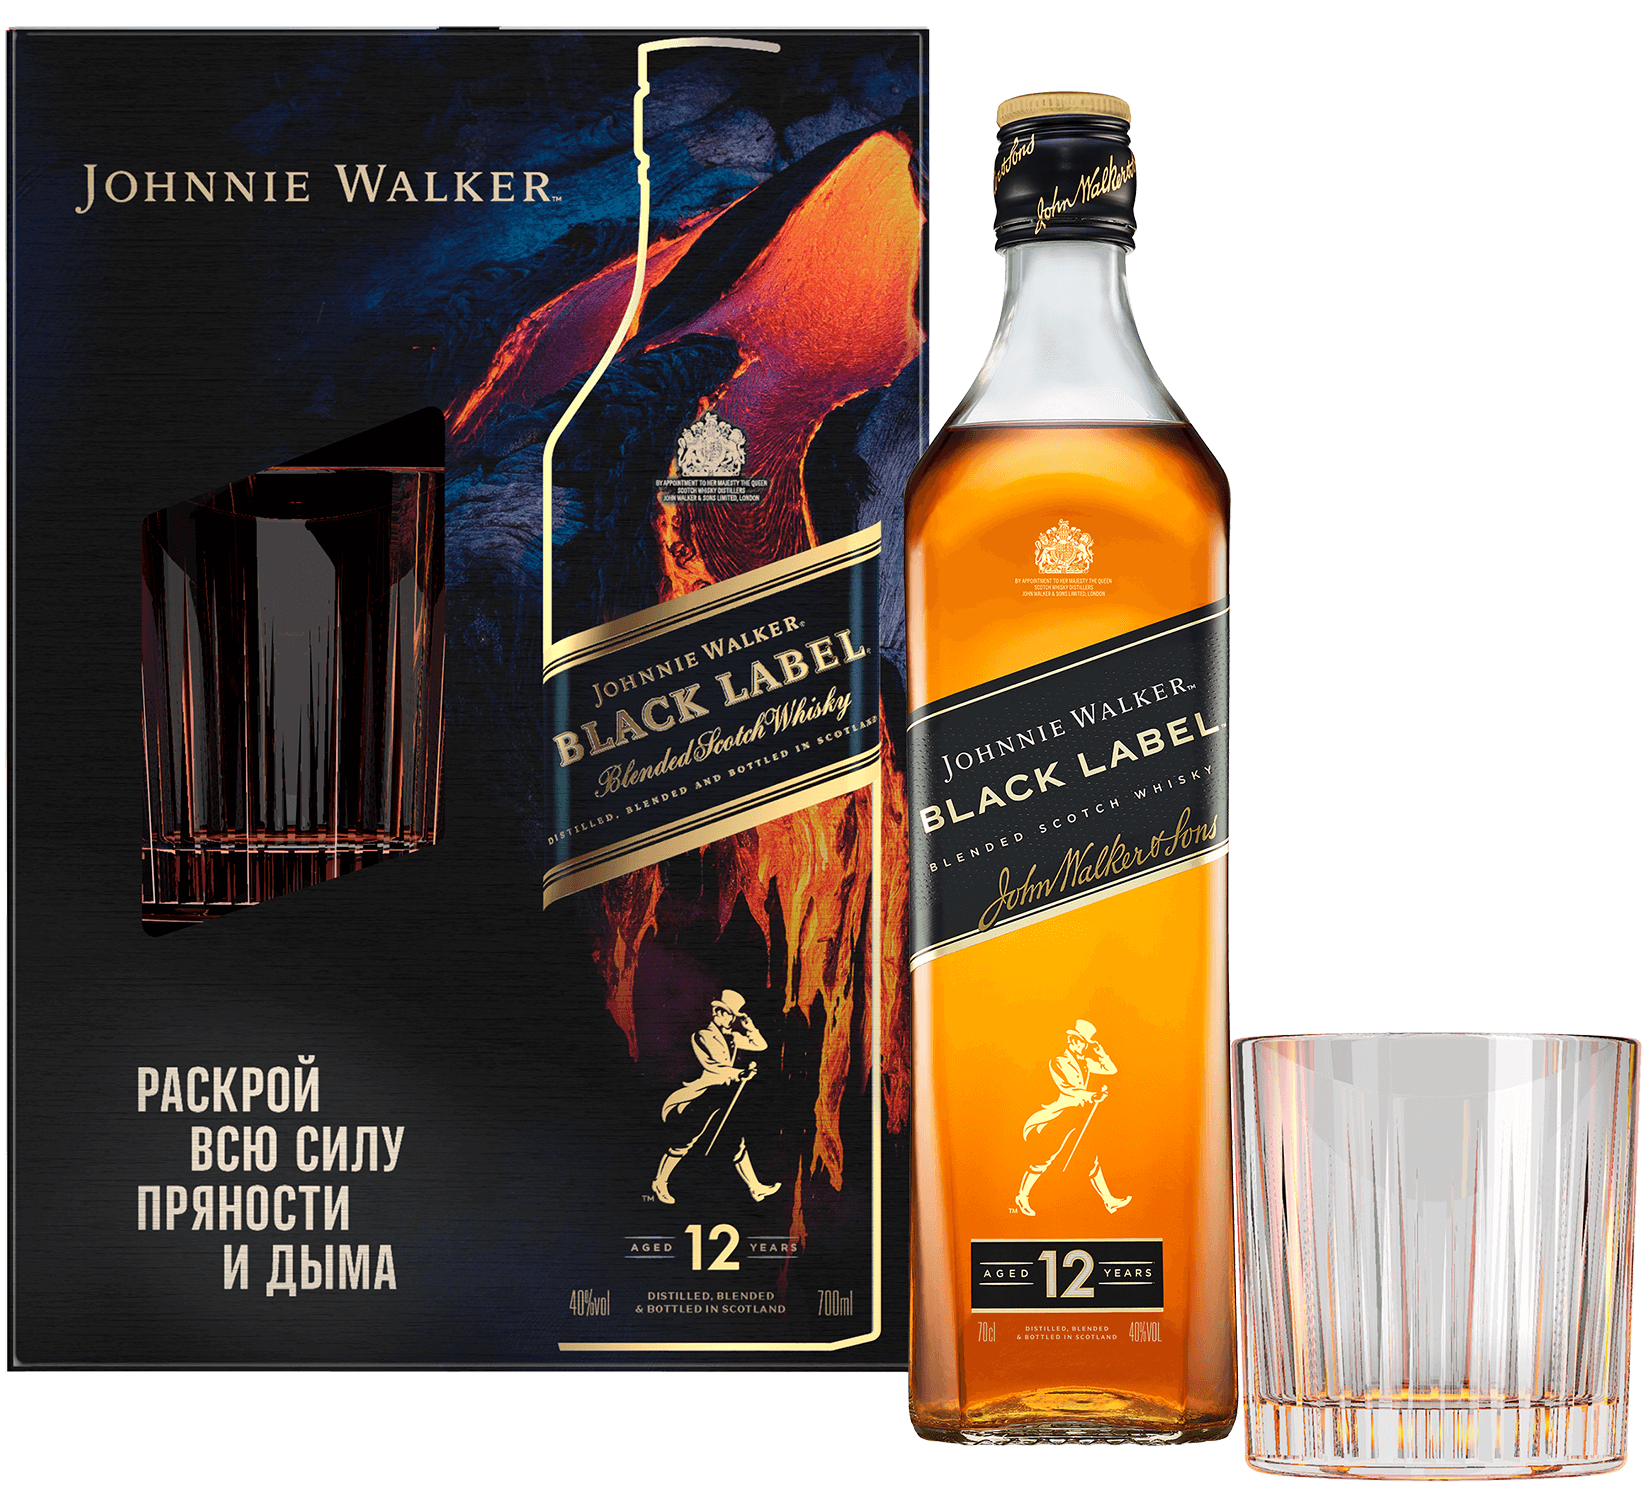 Johnnie Walker Black Label Blended Scotch Whisky (gift box with a glass) johnnie walker green label blended malt scotch whisky gift box